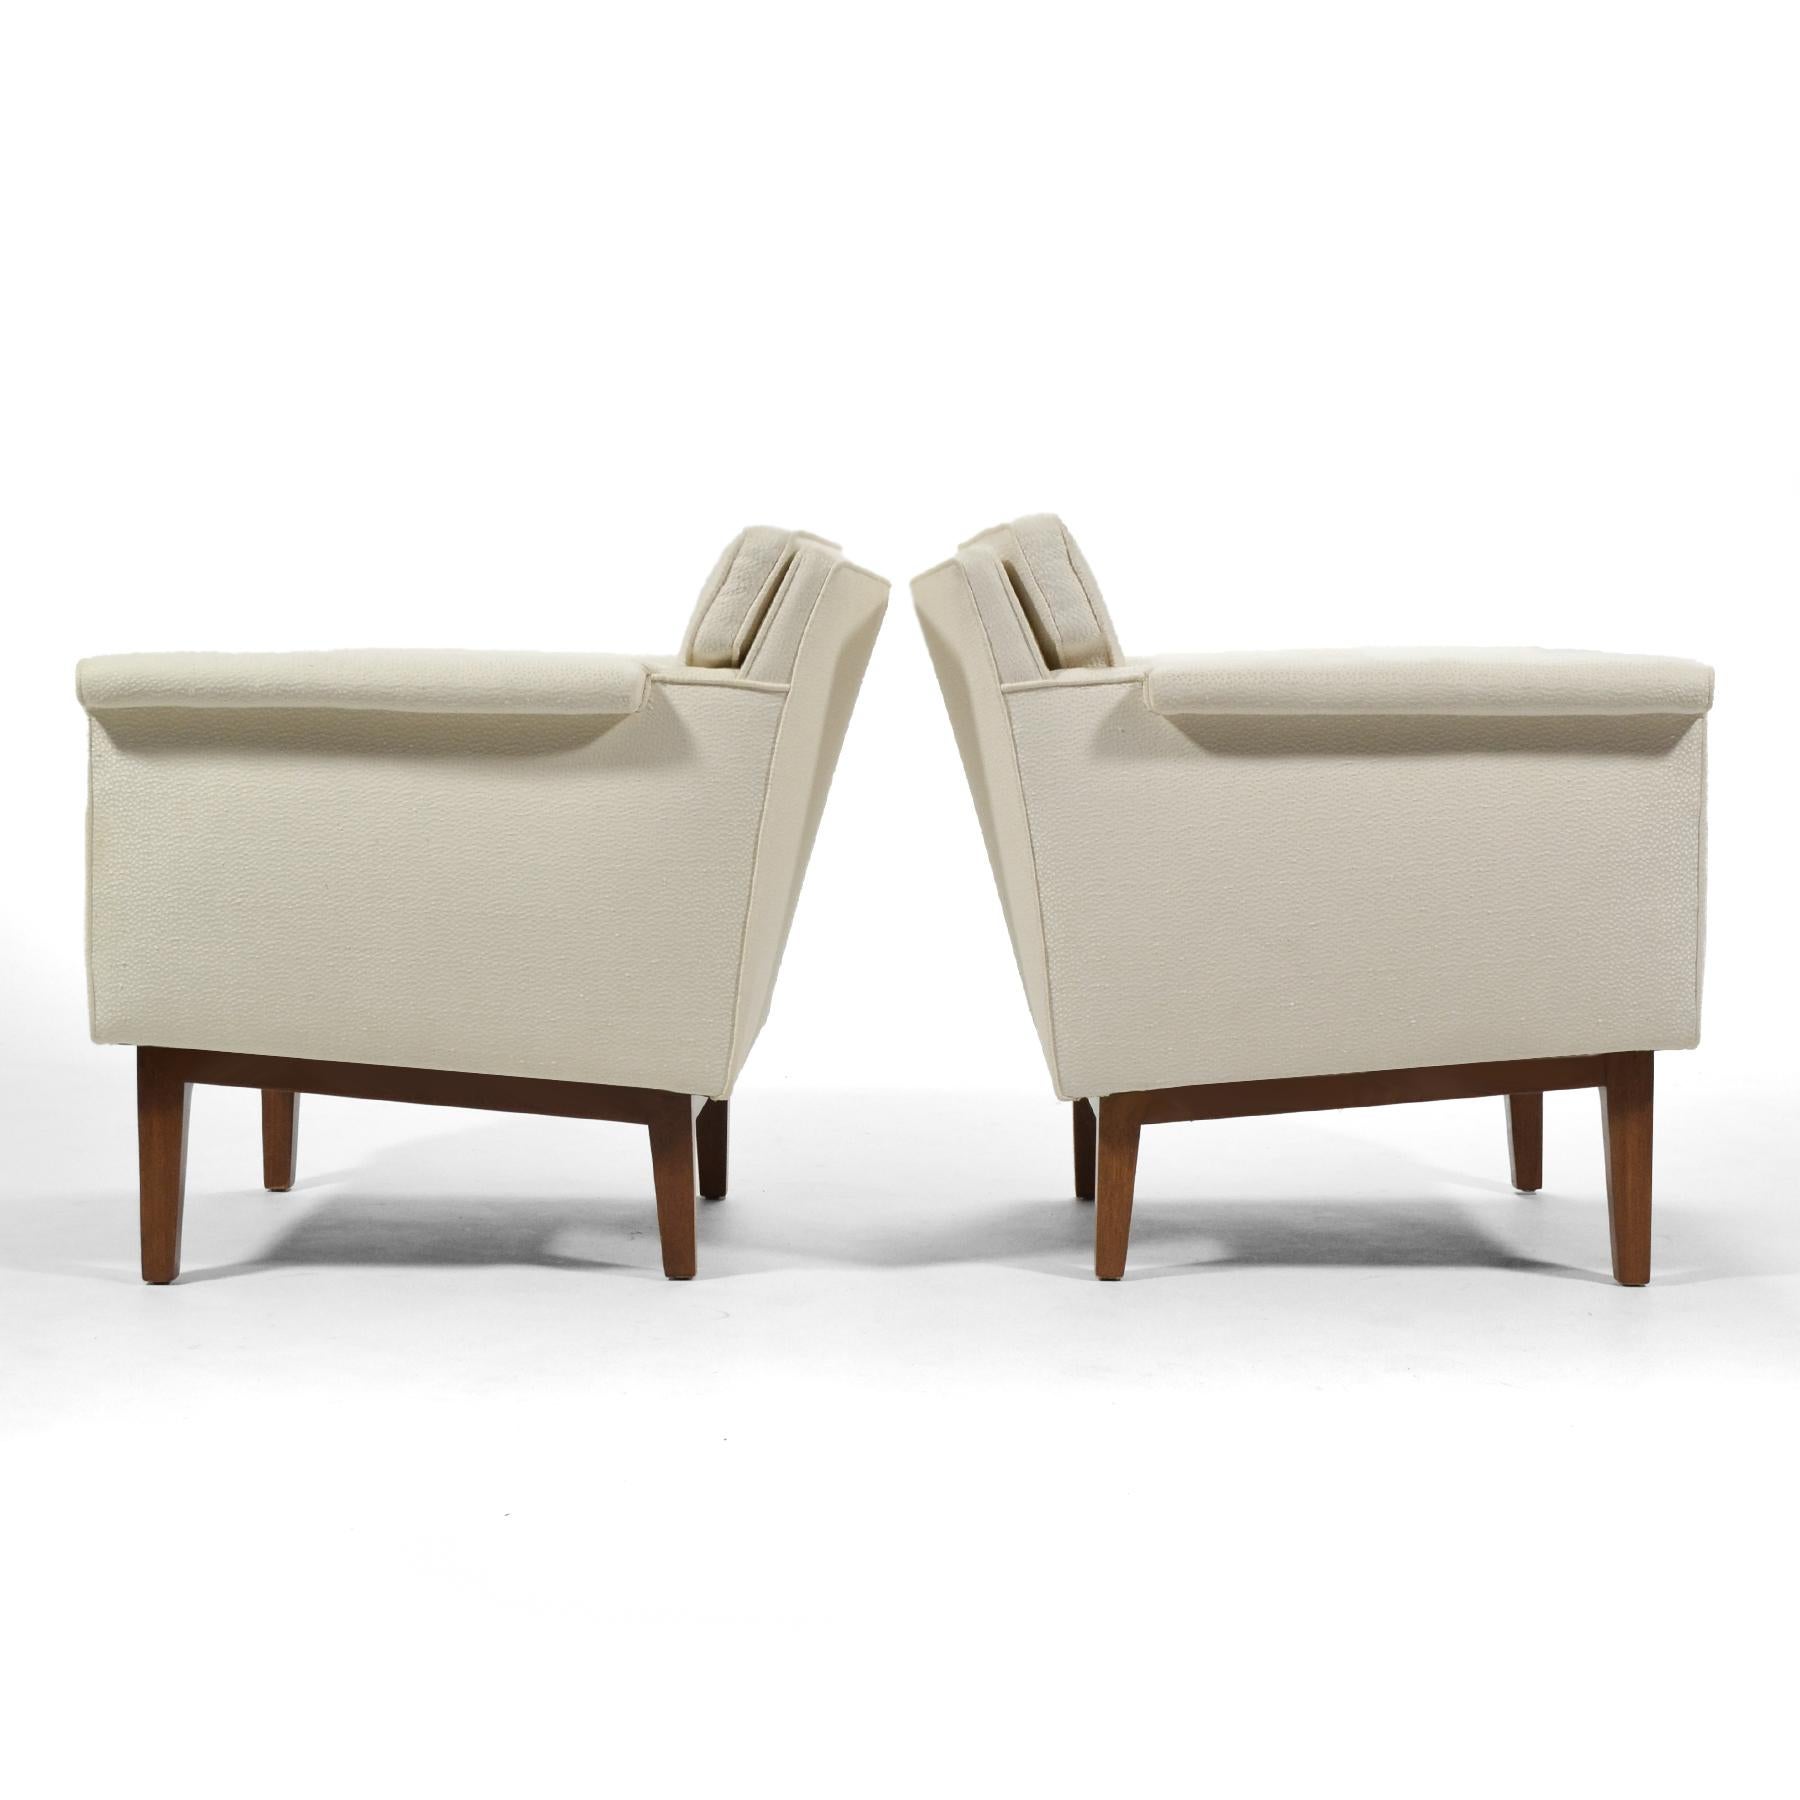 Edward Wormley Pair of Lounge Chairs by Dunbar 1